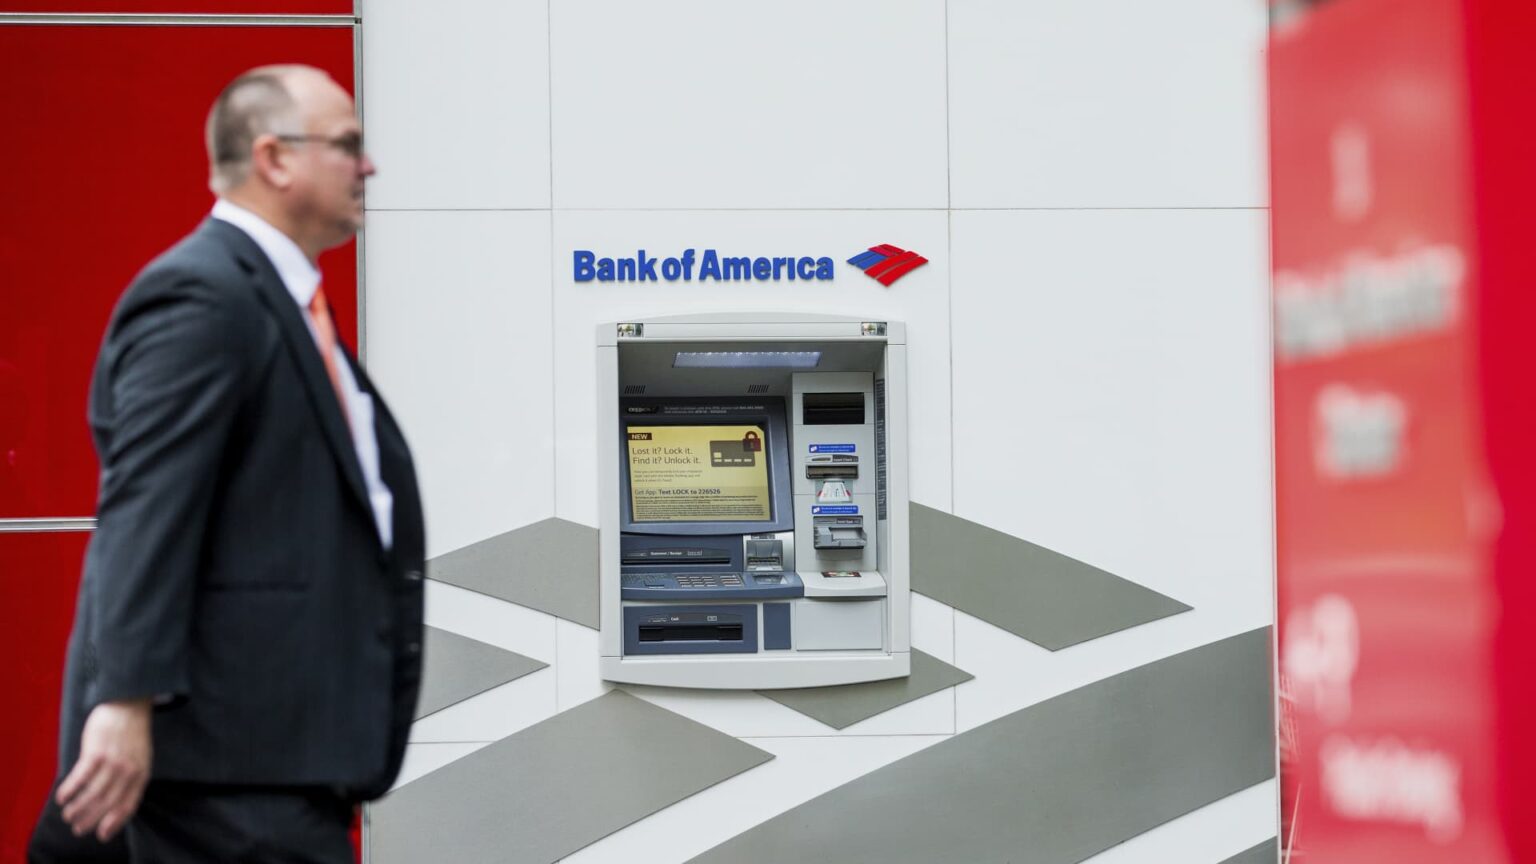 Bank of America fined for consumer abuse, including fake accounts, bogus charges